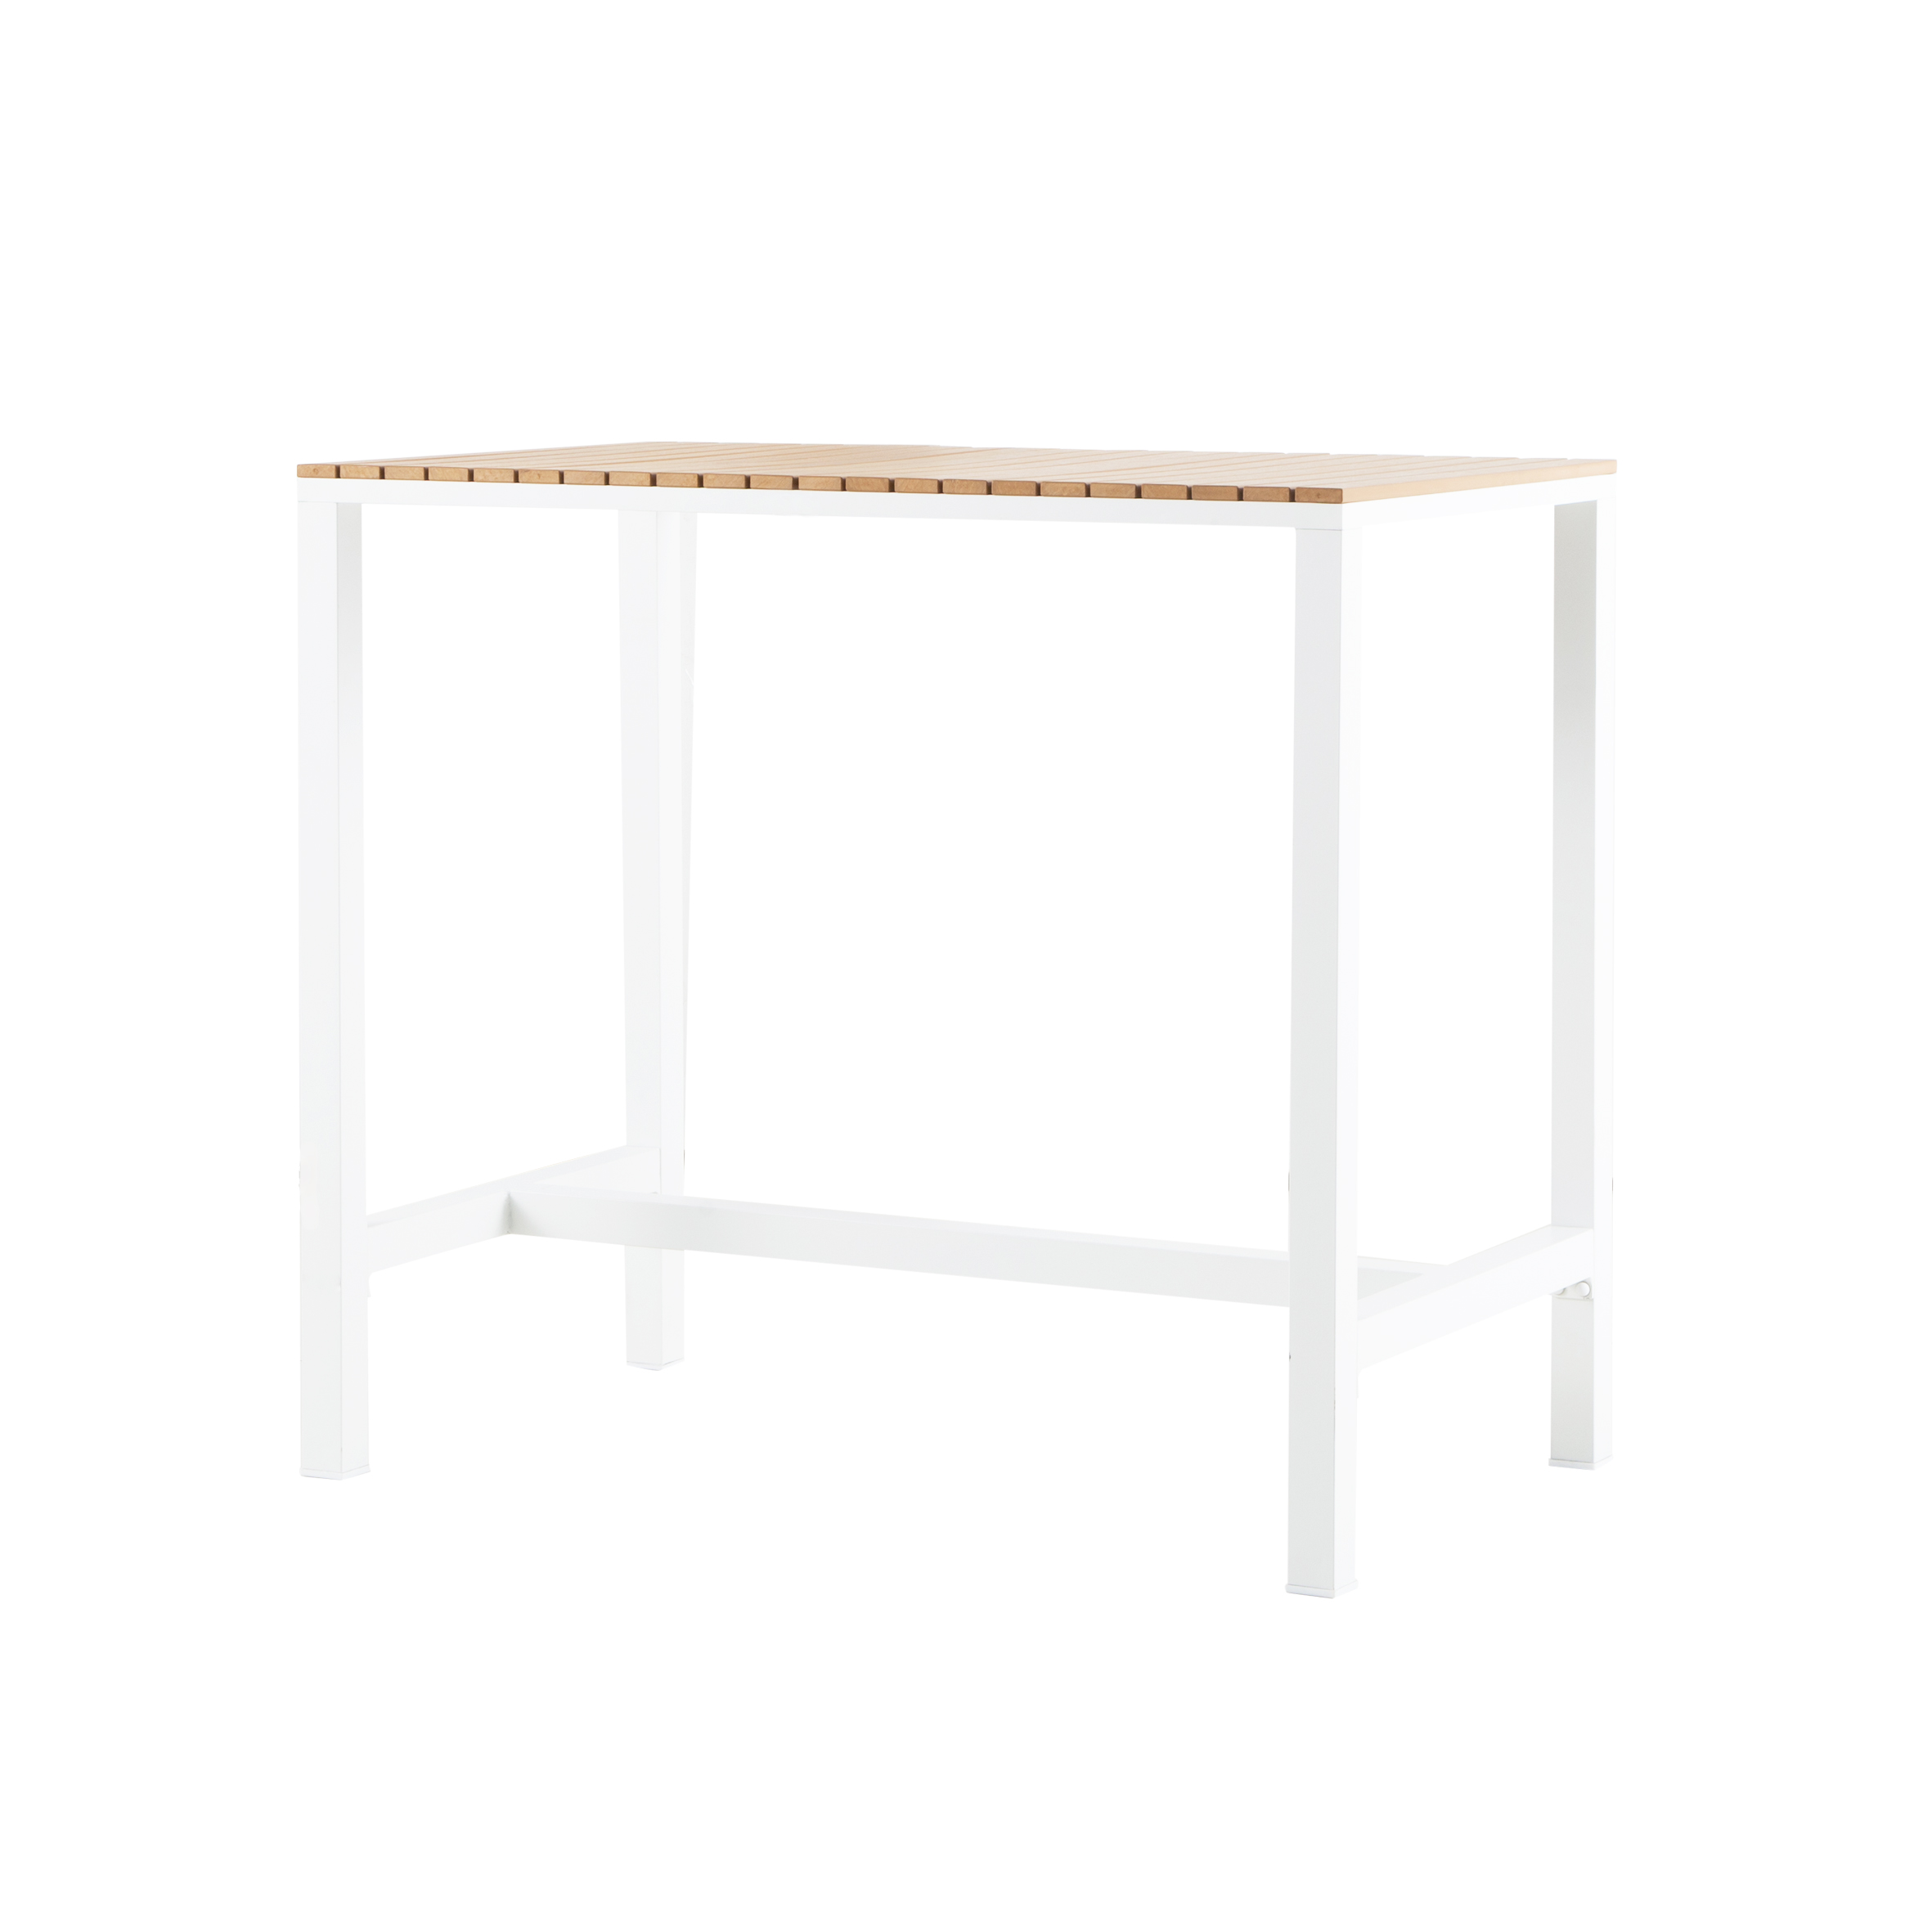 Snow white bar table (Poly wood) S1